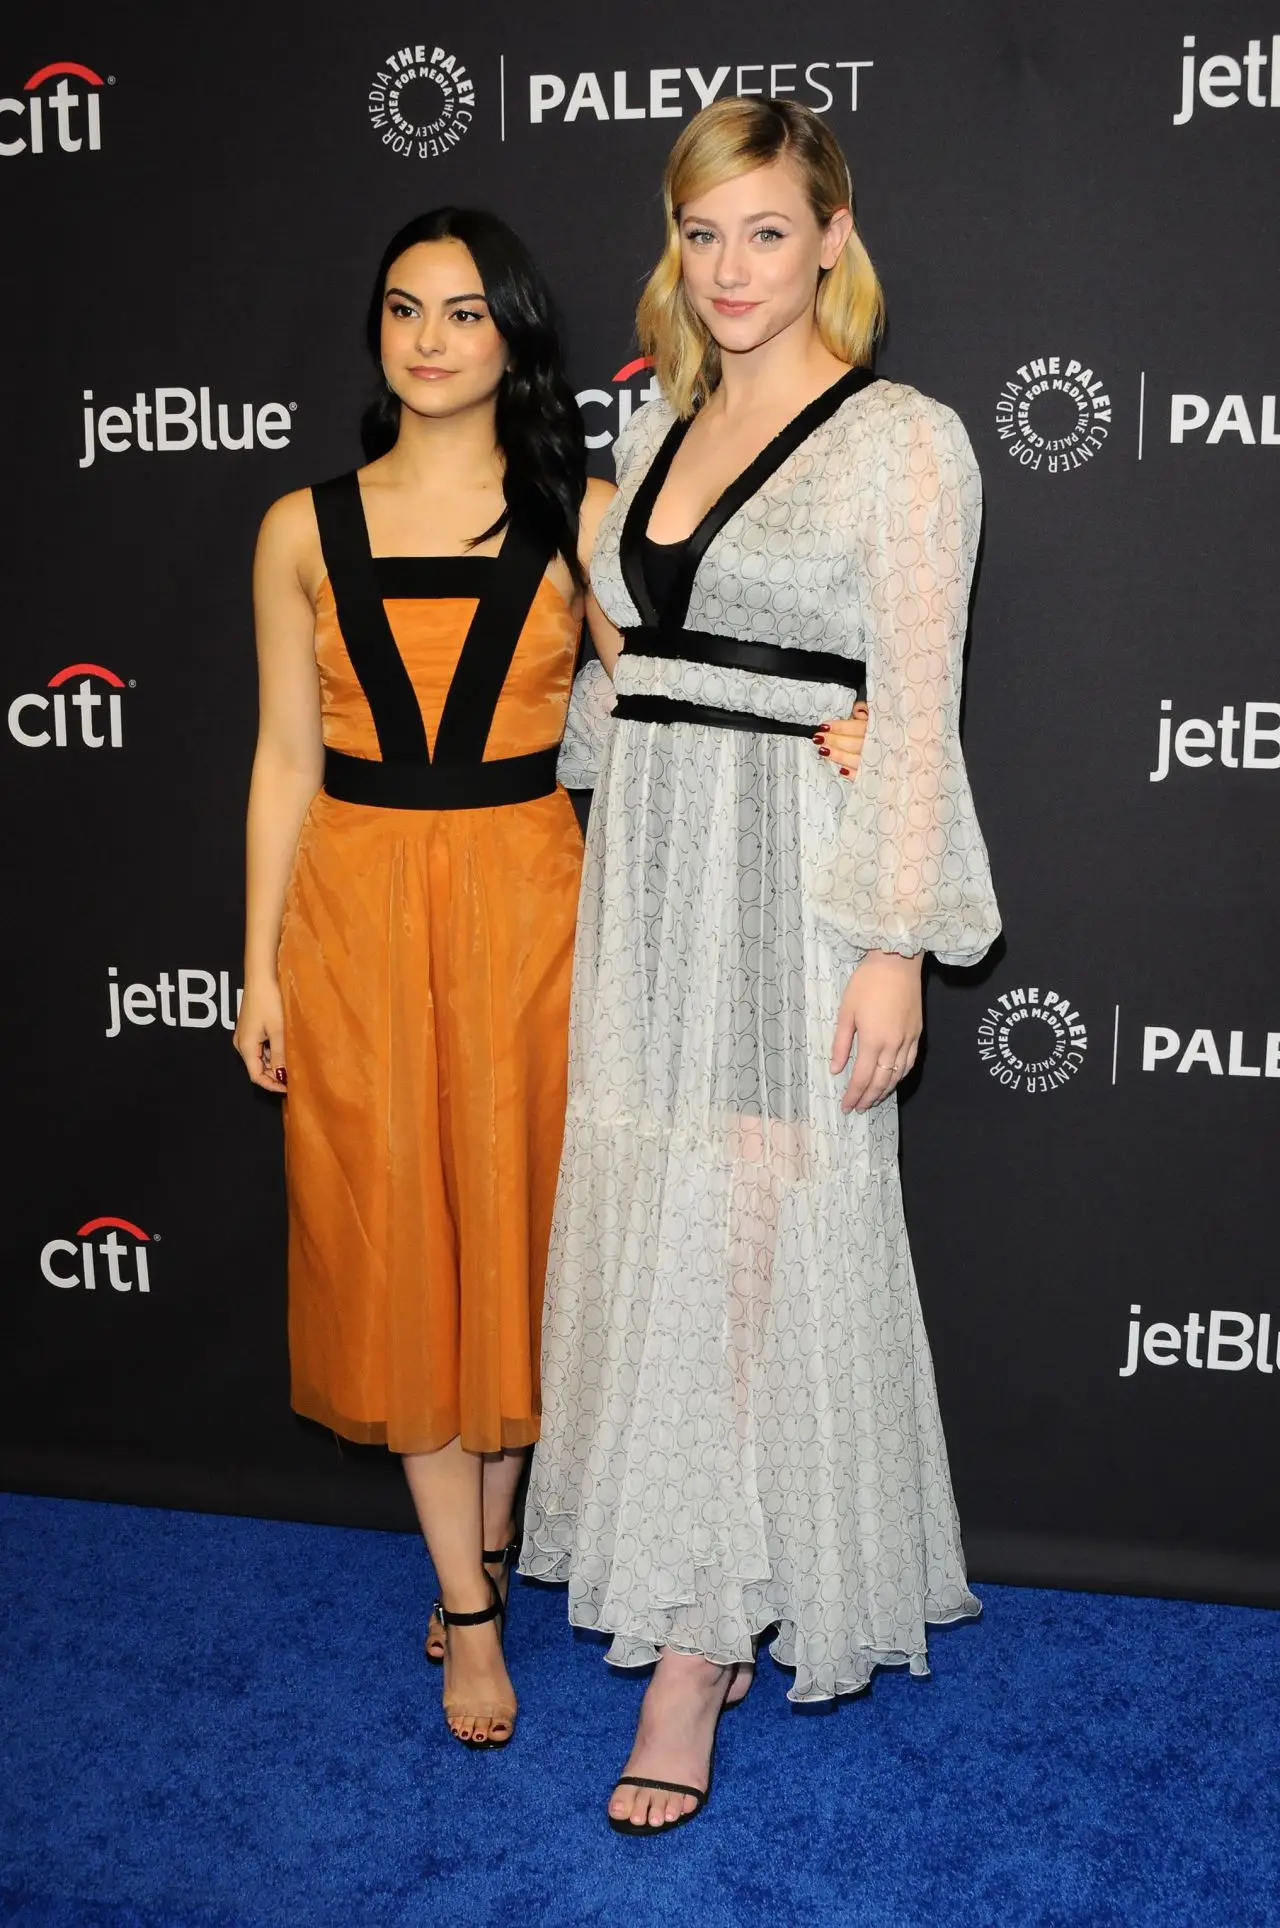 CAMILA MENDES AT RIVERDALE TV SHOW PRESENTATION AT PALEYFEST IN LOS ANGELES5